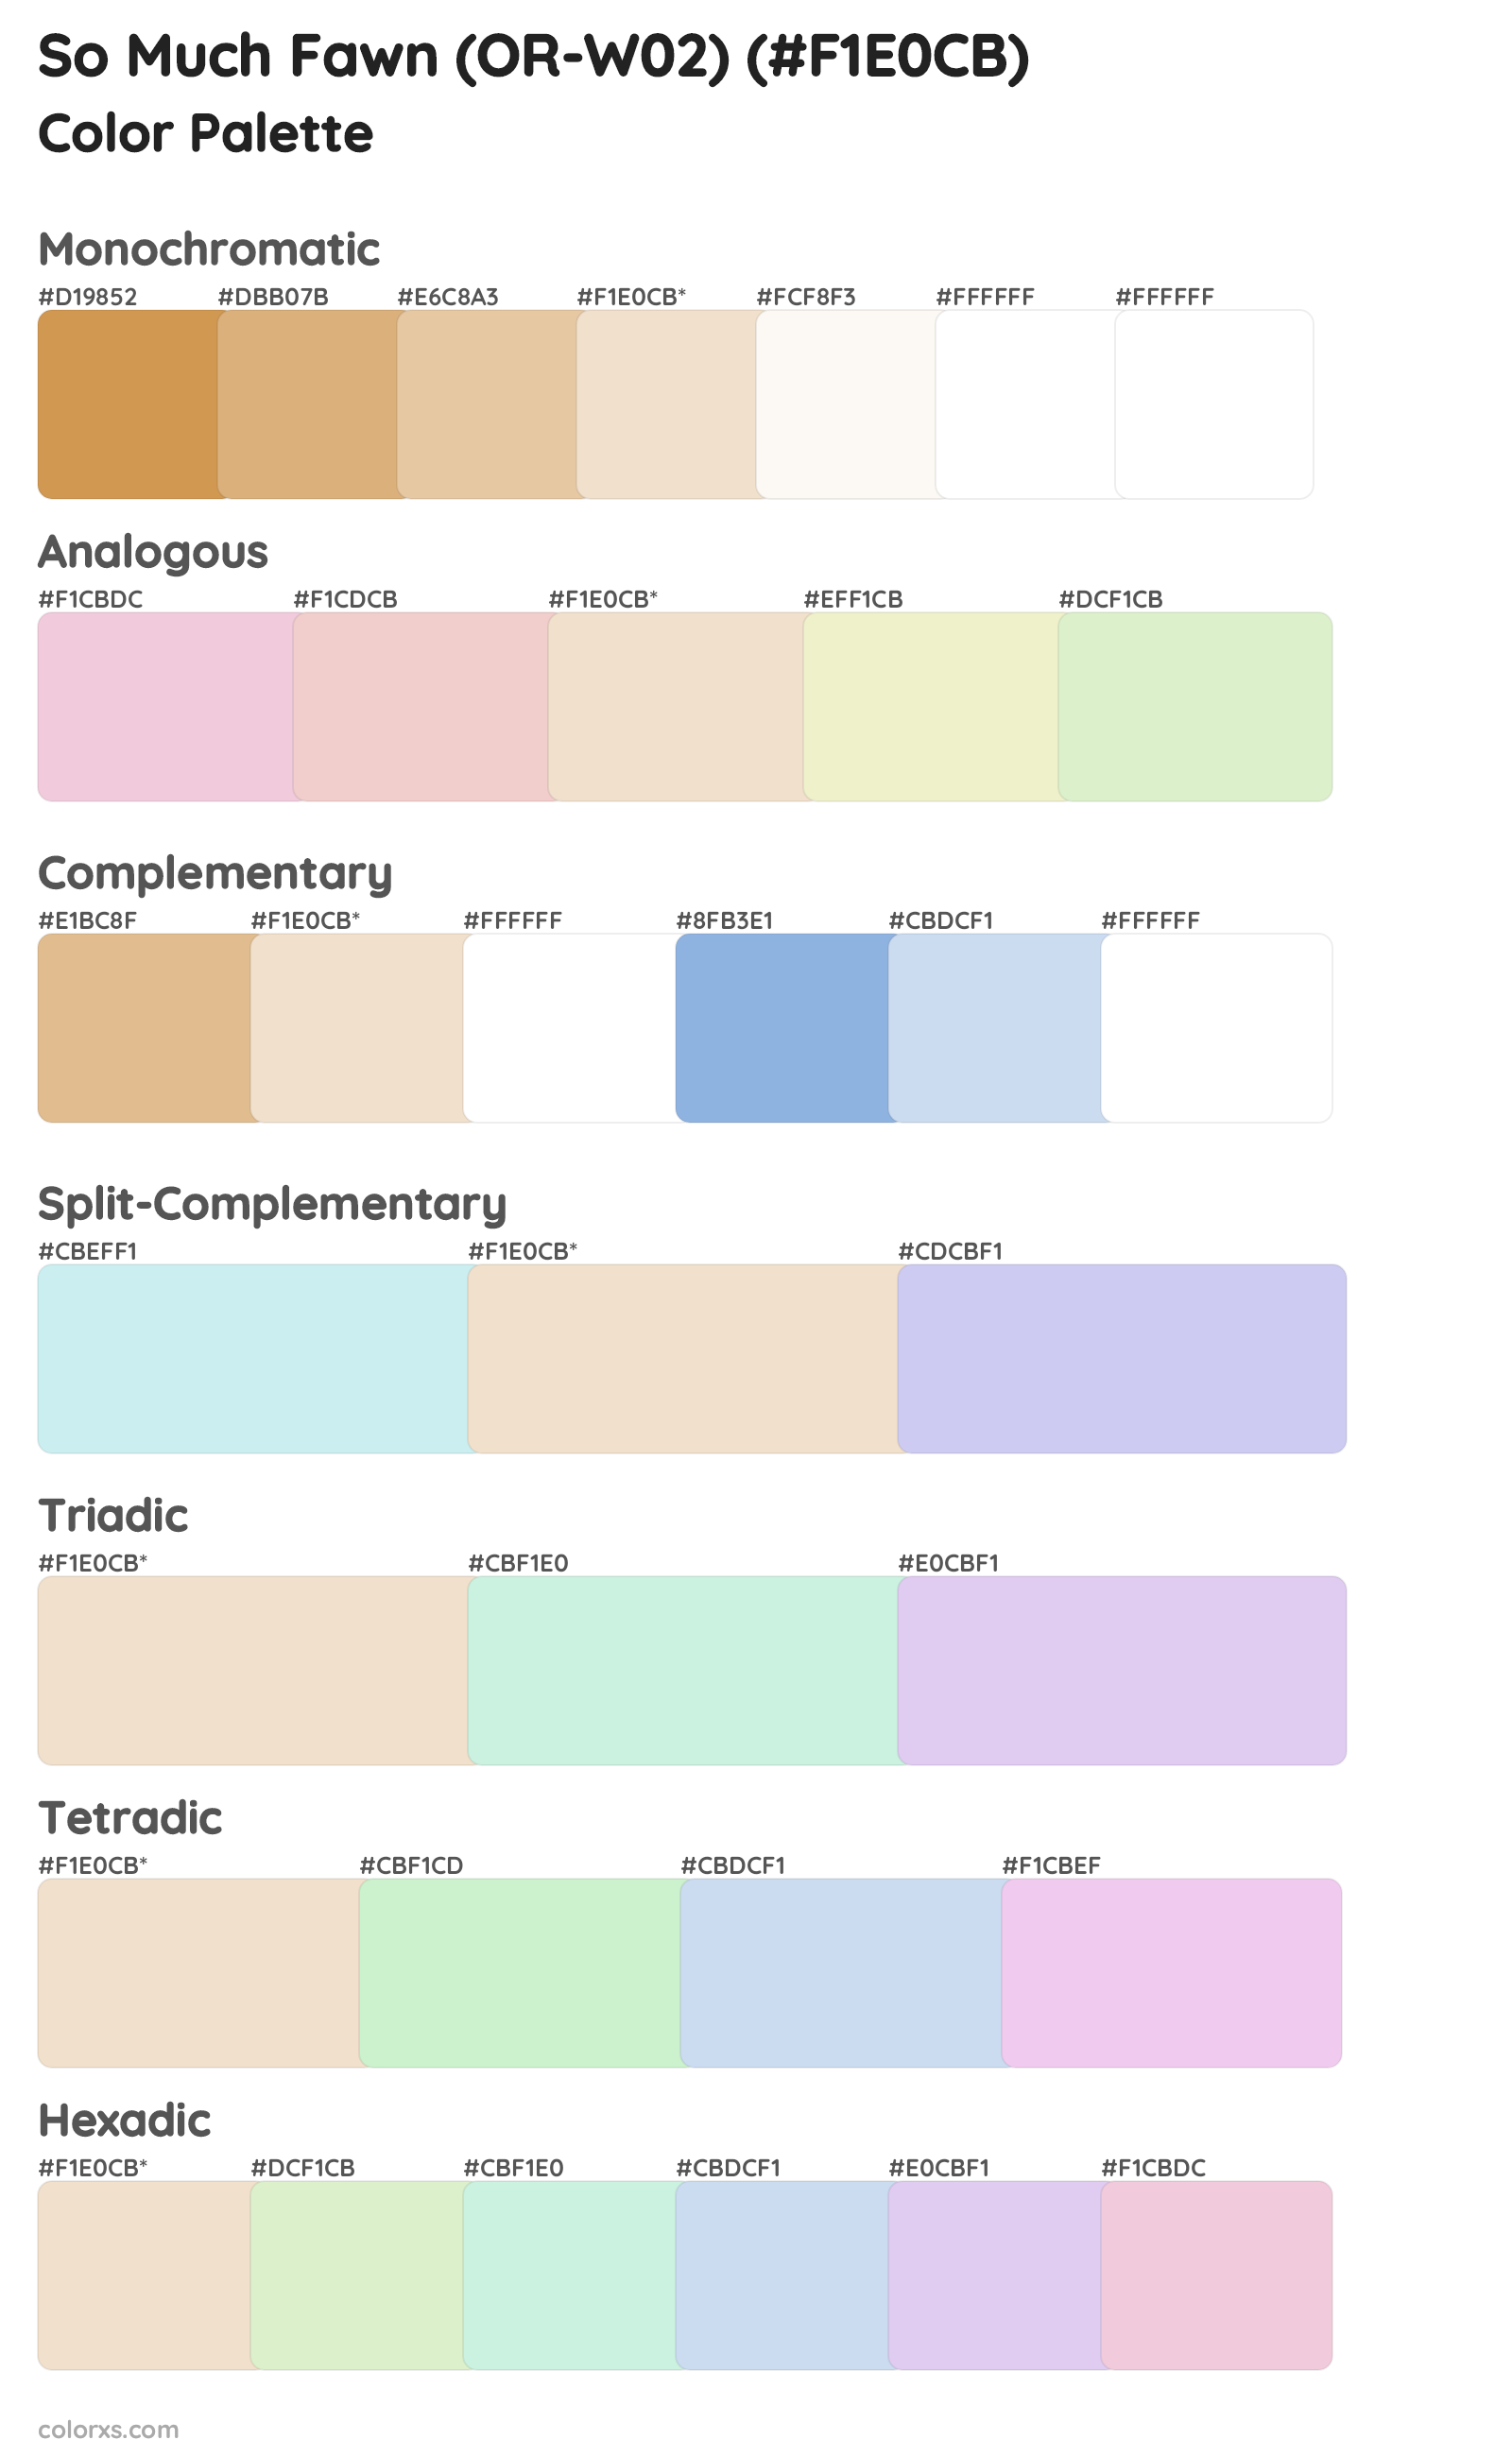 So Much Fawn (OR-W02) Color Scheme Palettes